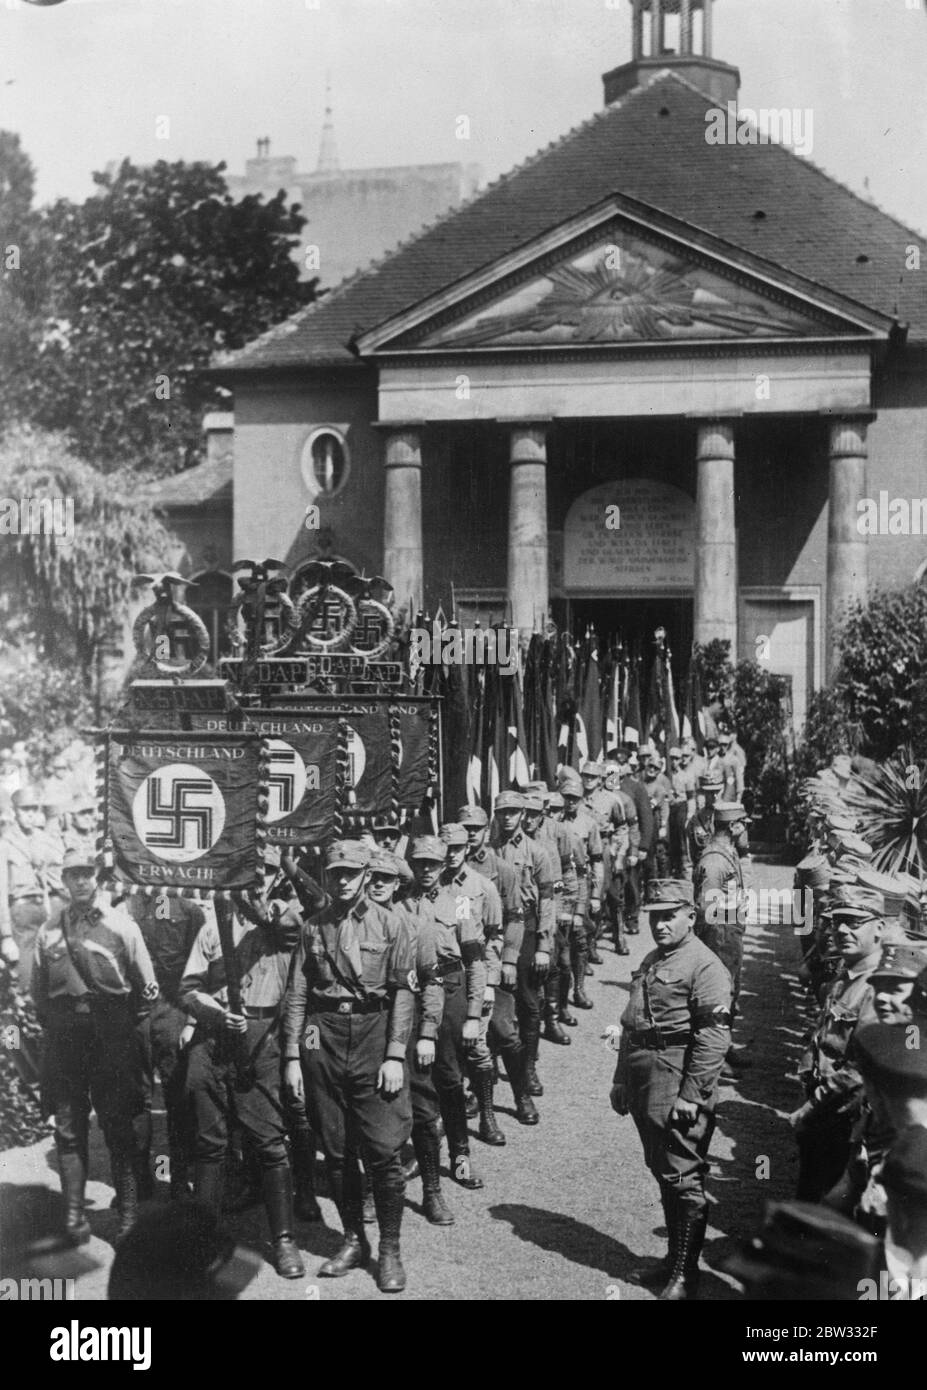 Nazi victim of Berlin riots has imposing funeral . The imposing funeral procession leaving the Friedhof Chapel in Berlin when Hellmut Koster , a Nazi victim of the Berlin Nazi - Communist riots was buried with full honours . 28 June 1932 Stock Photo